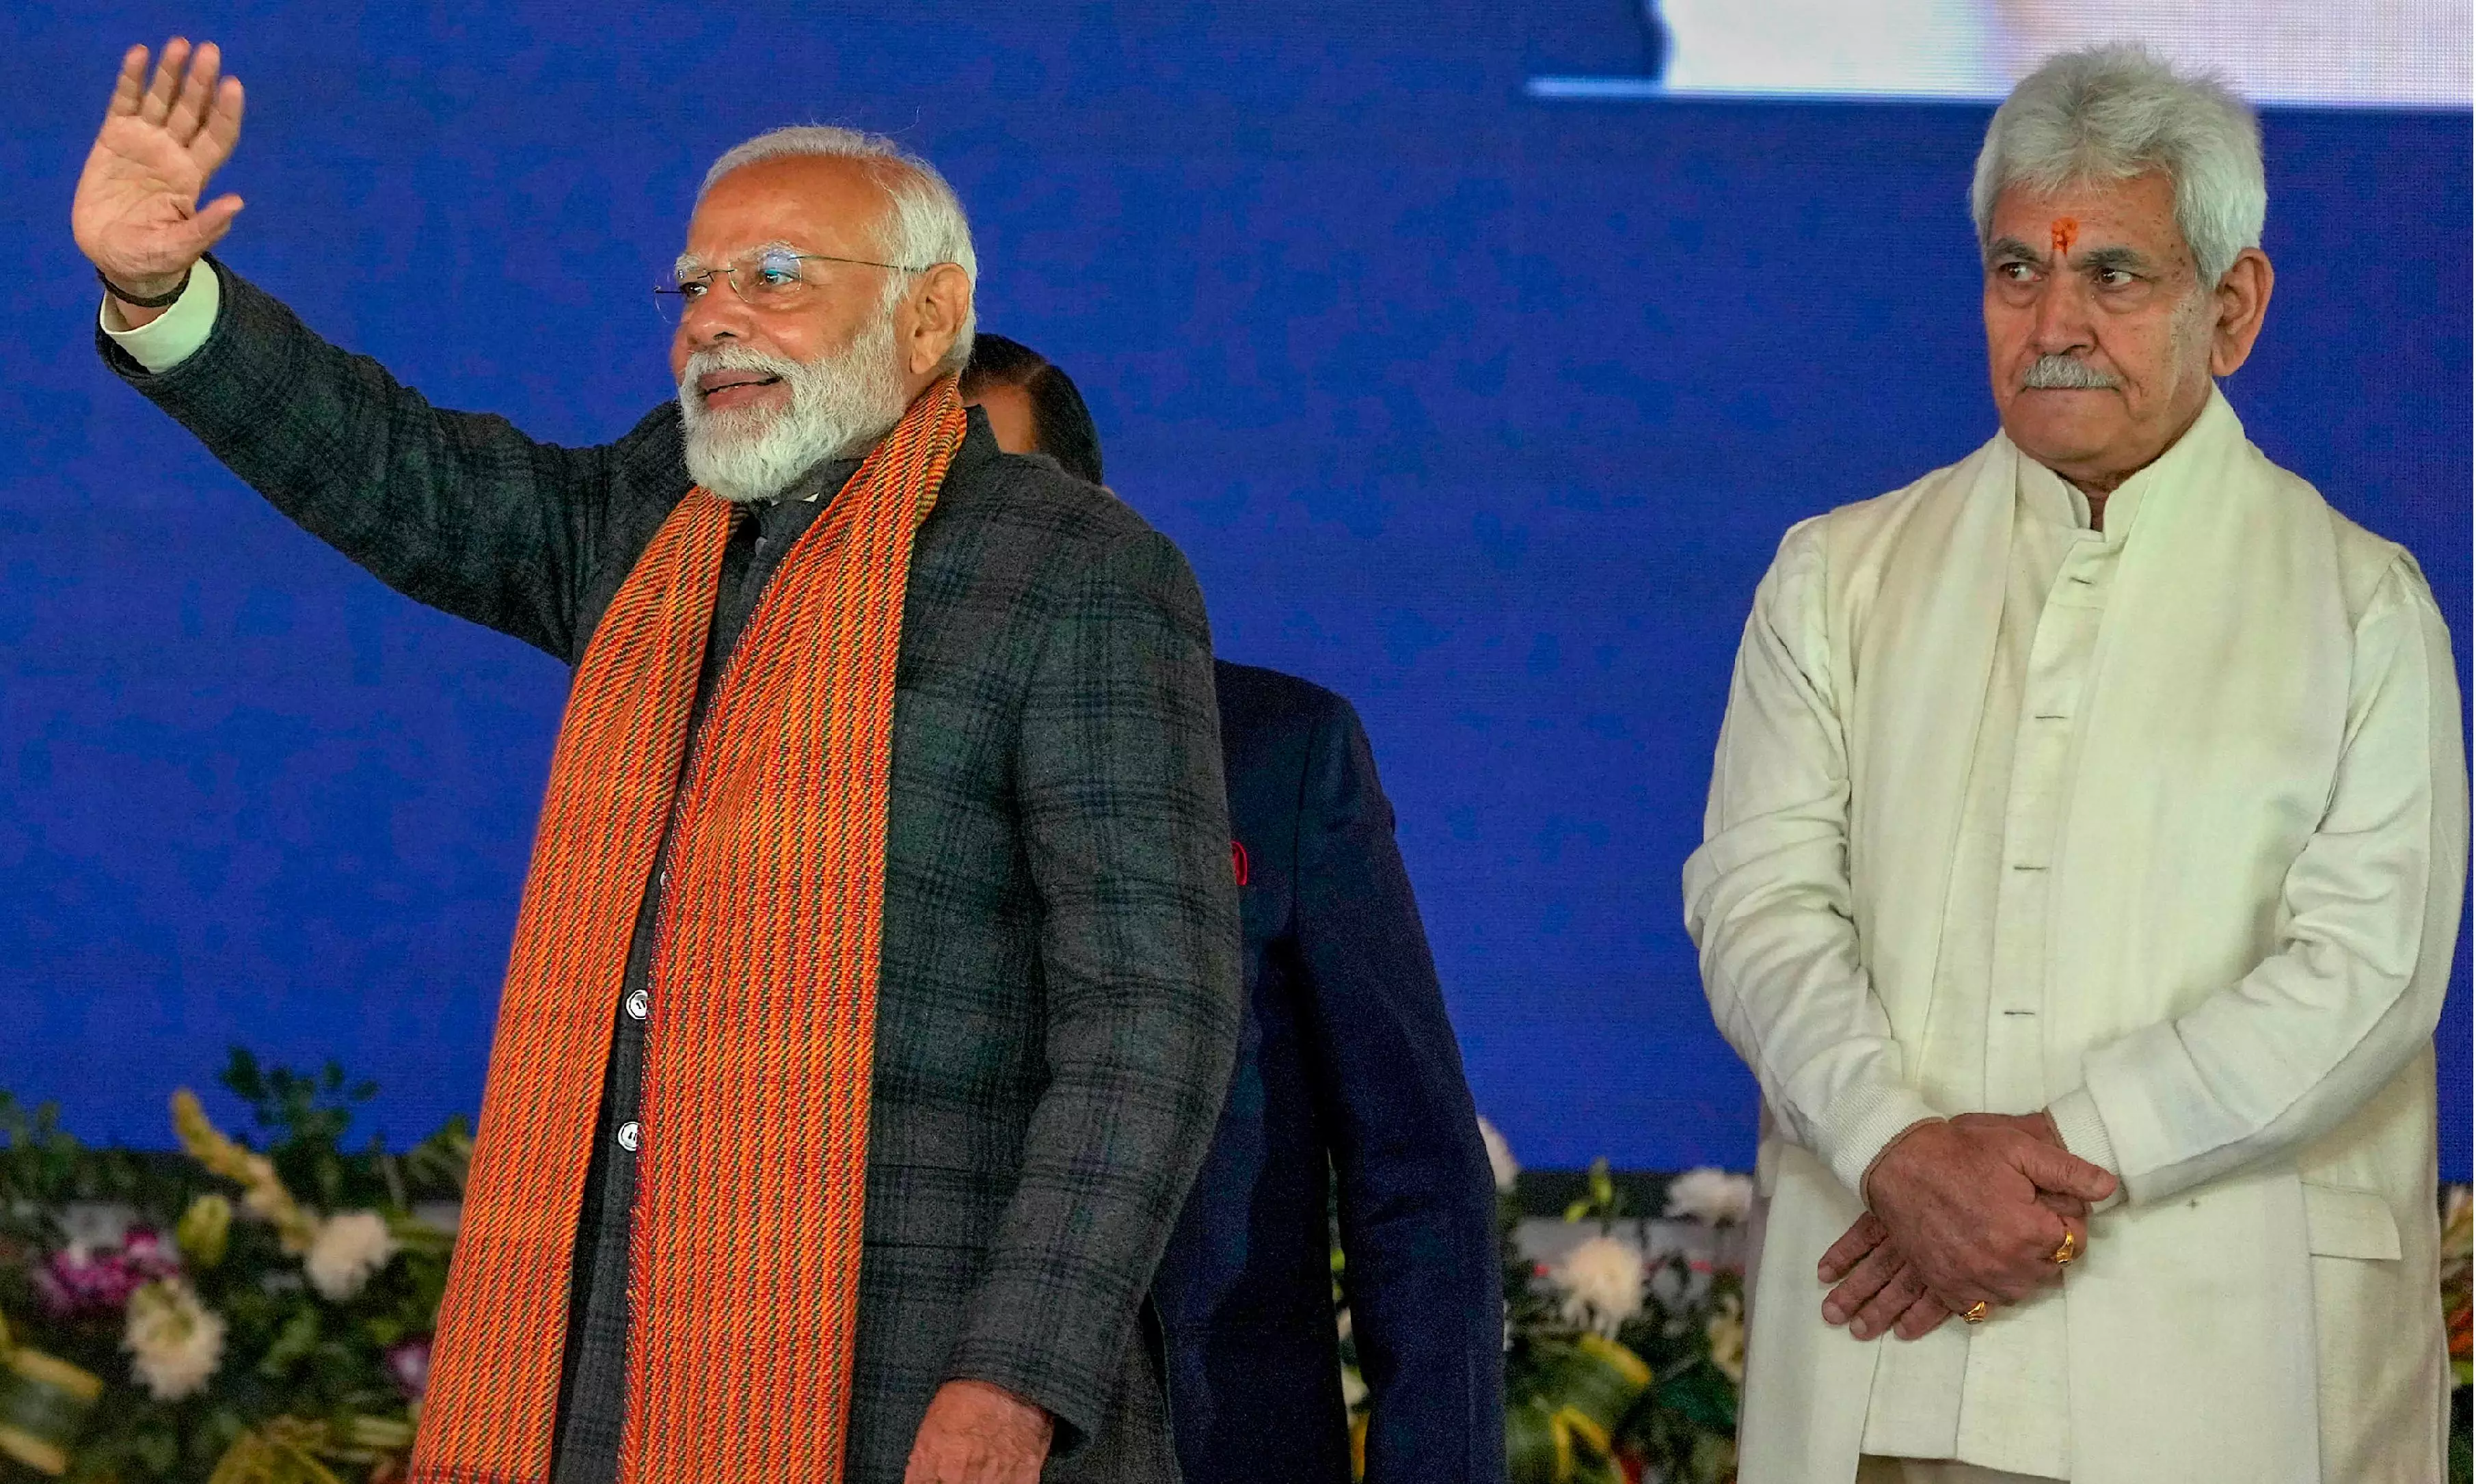 Modi promotes Wed in India campaign to boost tourism in Kashmir